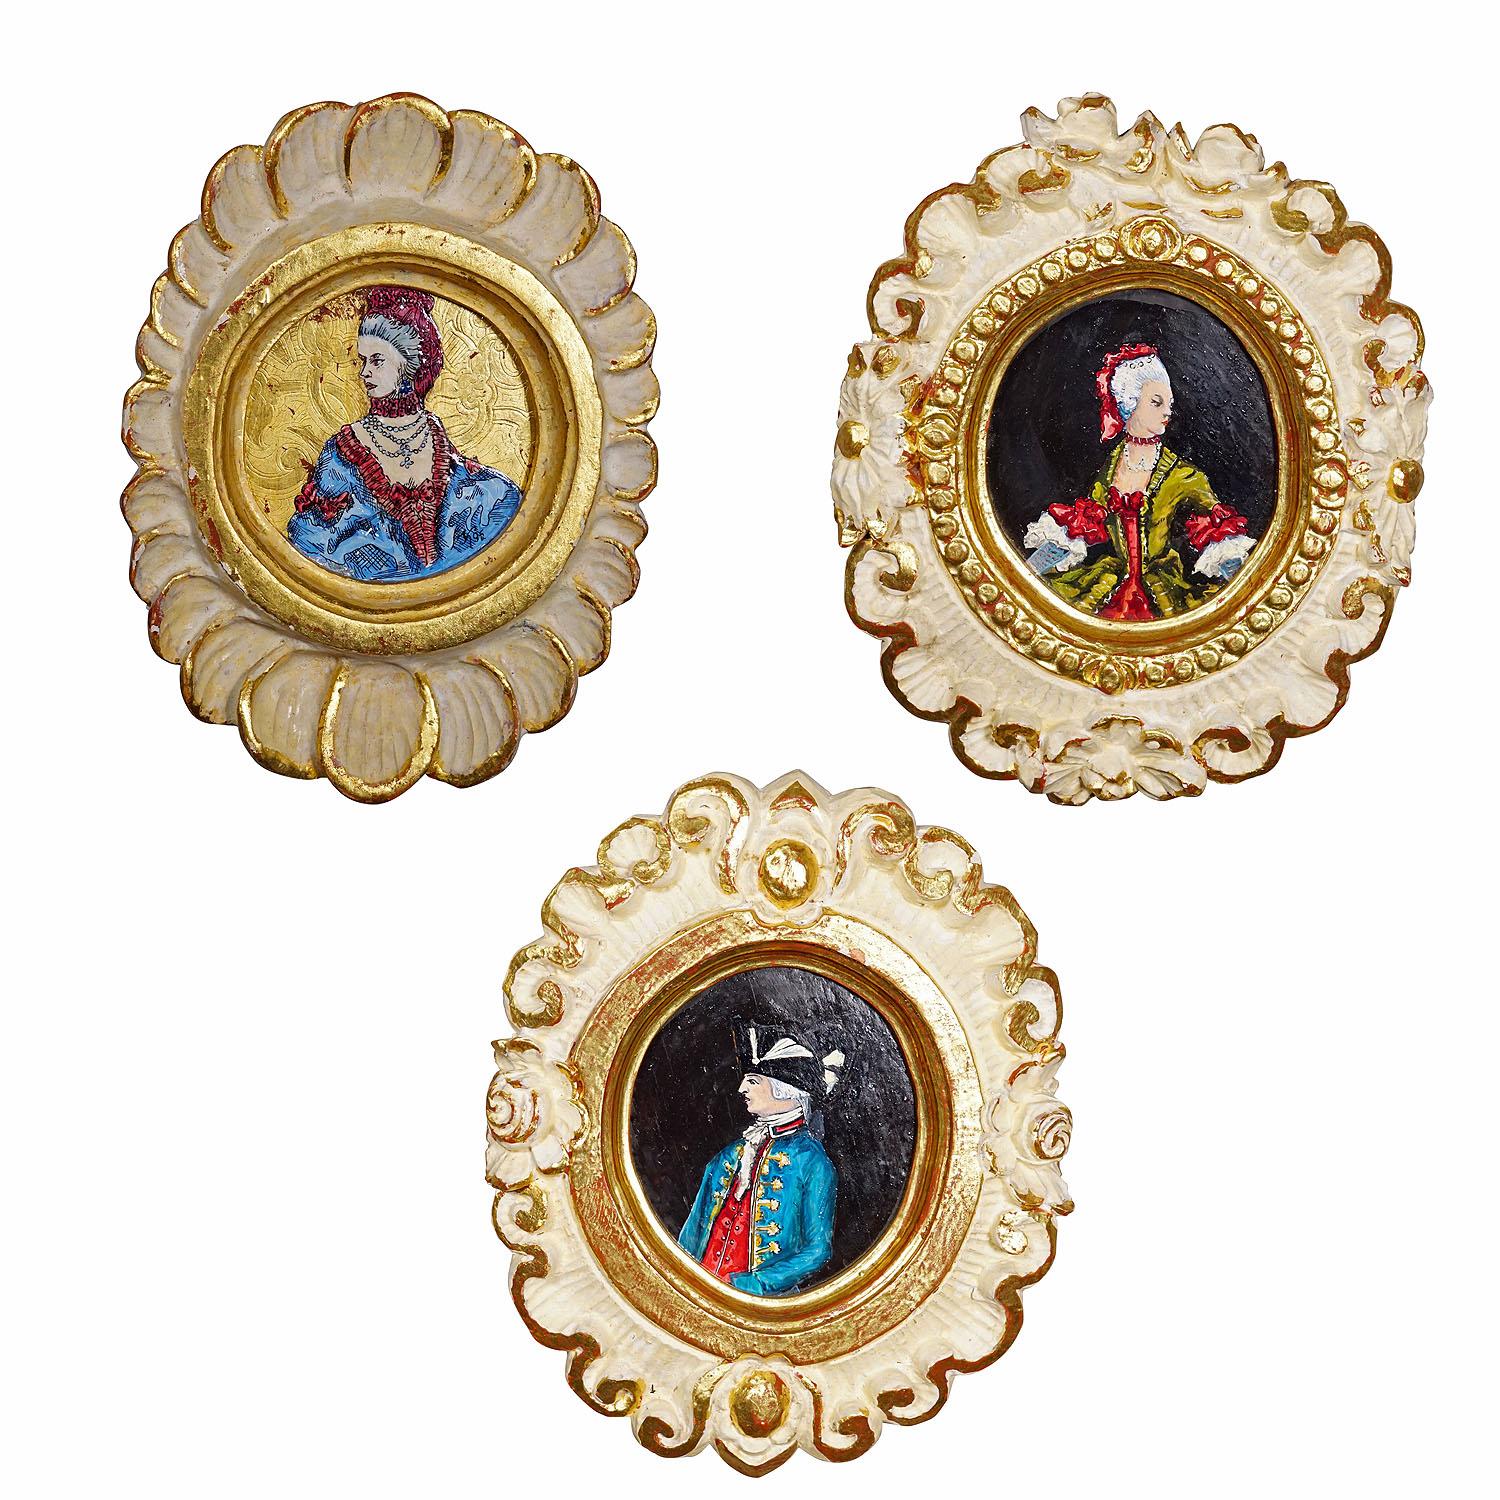 Set of Three Vintage Paintings with People in Rococo Costumes

A set of three paintings depicting two noble ladies and a noble man in Rococo costumes. Handpainted with enamel paint on wood. Germany ca. 1950s. Framed in wooden carved and gilded